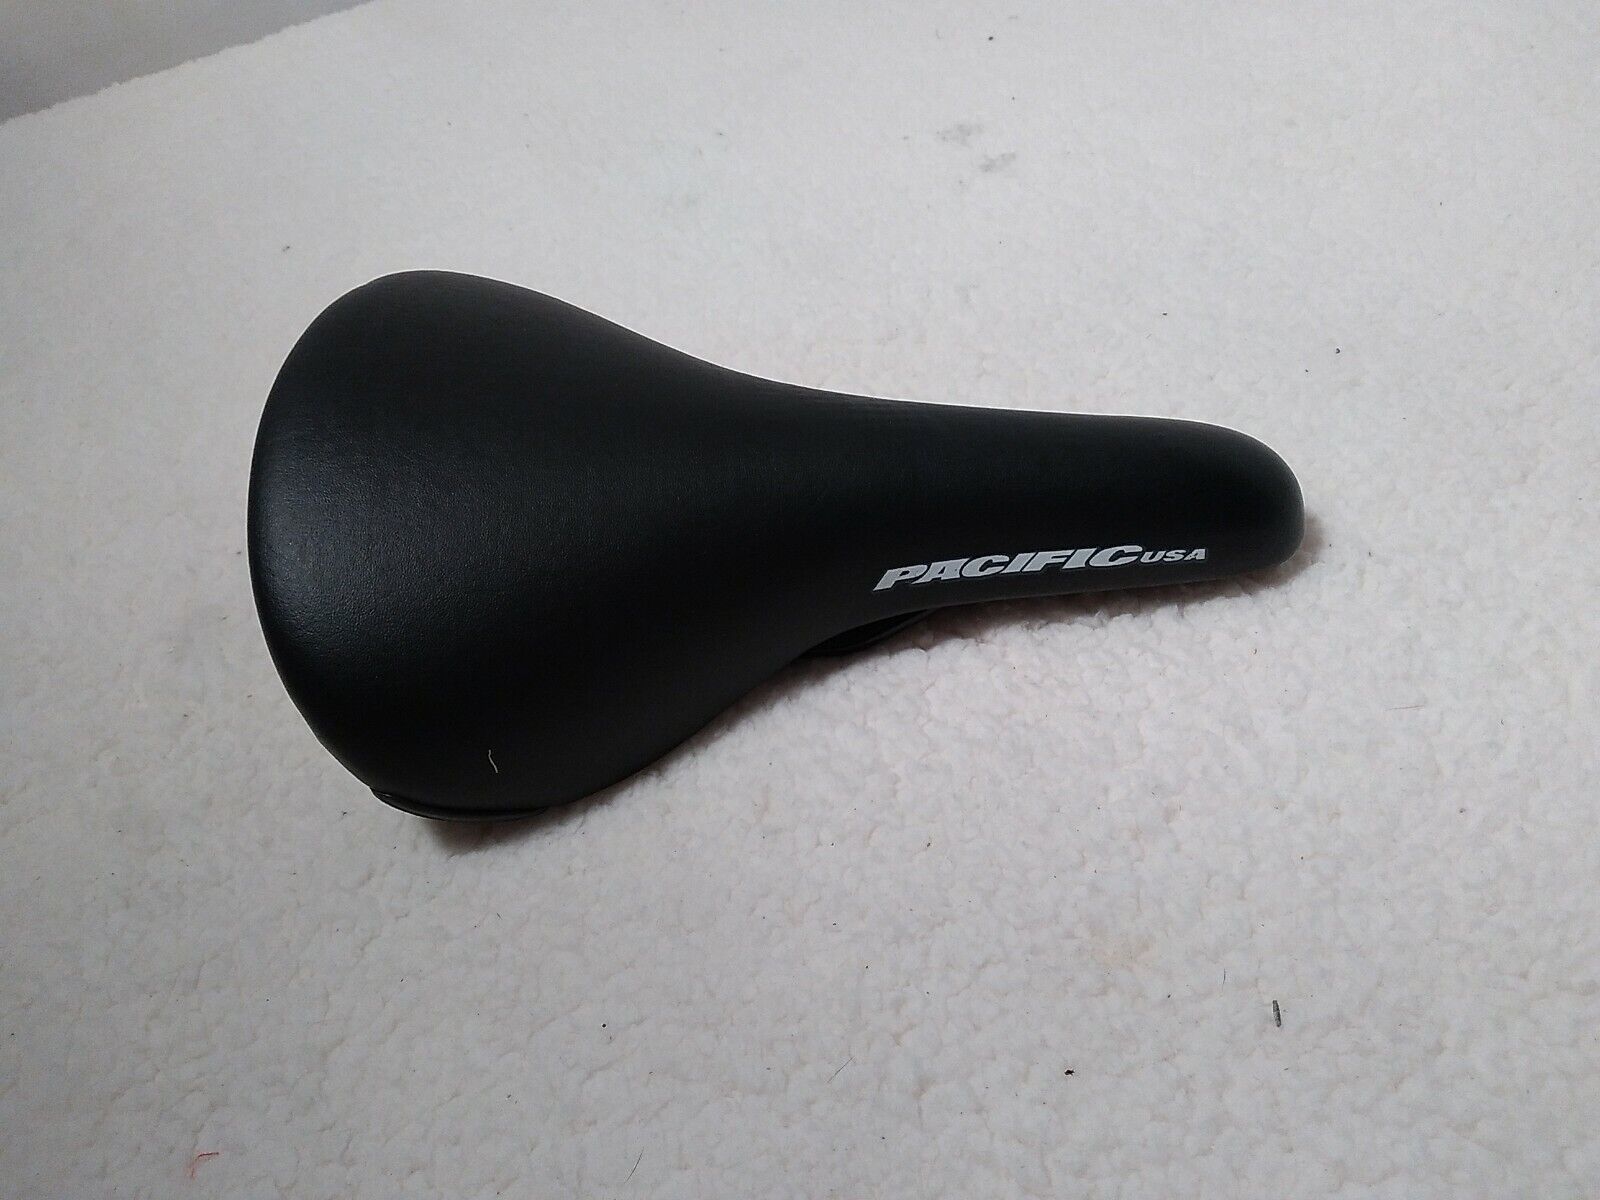 BIKE SEAT, VELO PACIFIC USA,10-1/2" X 7 1/2" +/-, ON 1" POST, NEW CONDITION - $28.04